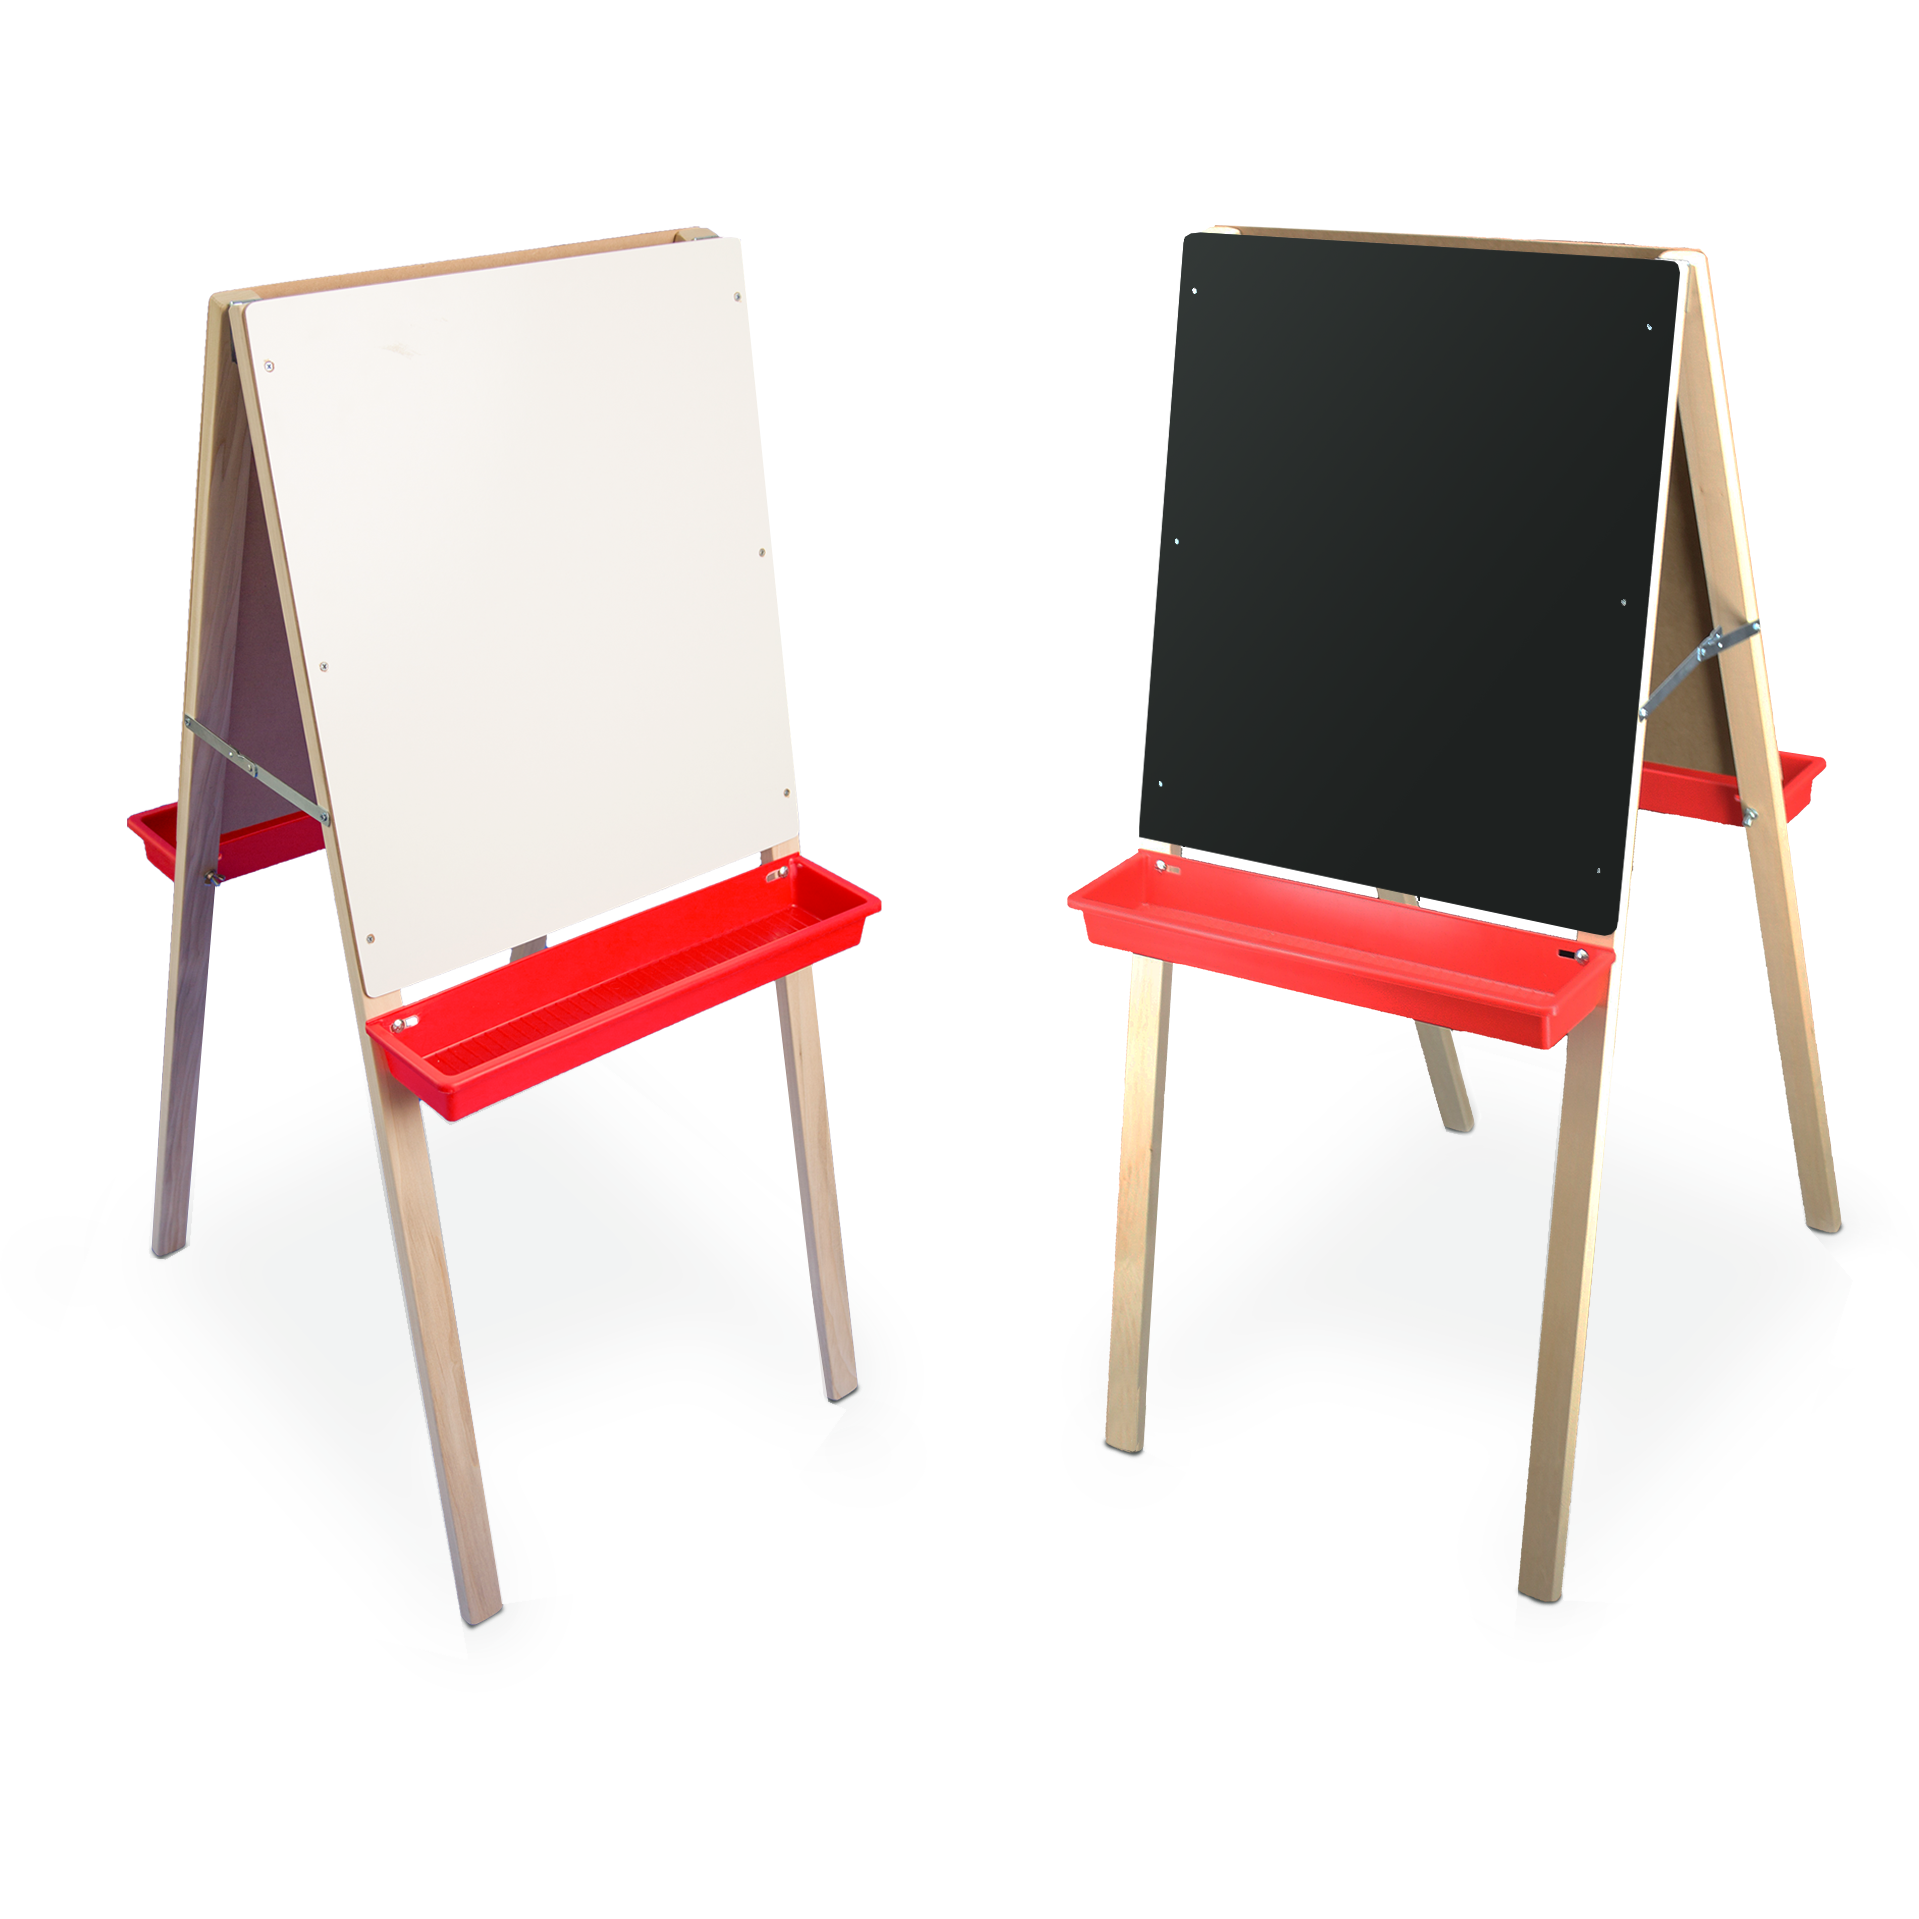 Child's Double Easel, Black Chalk/White Markerboard